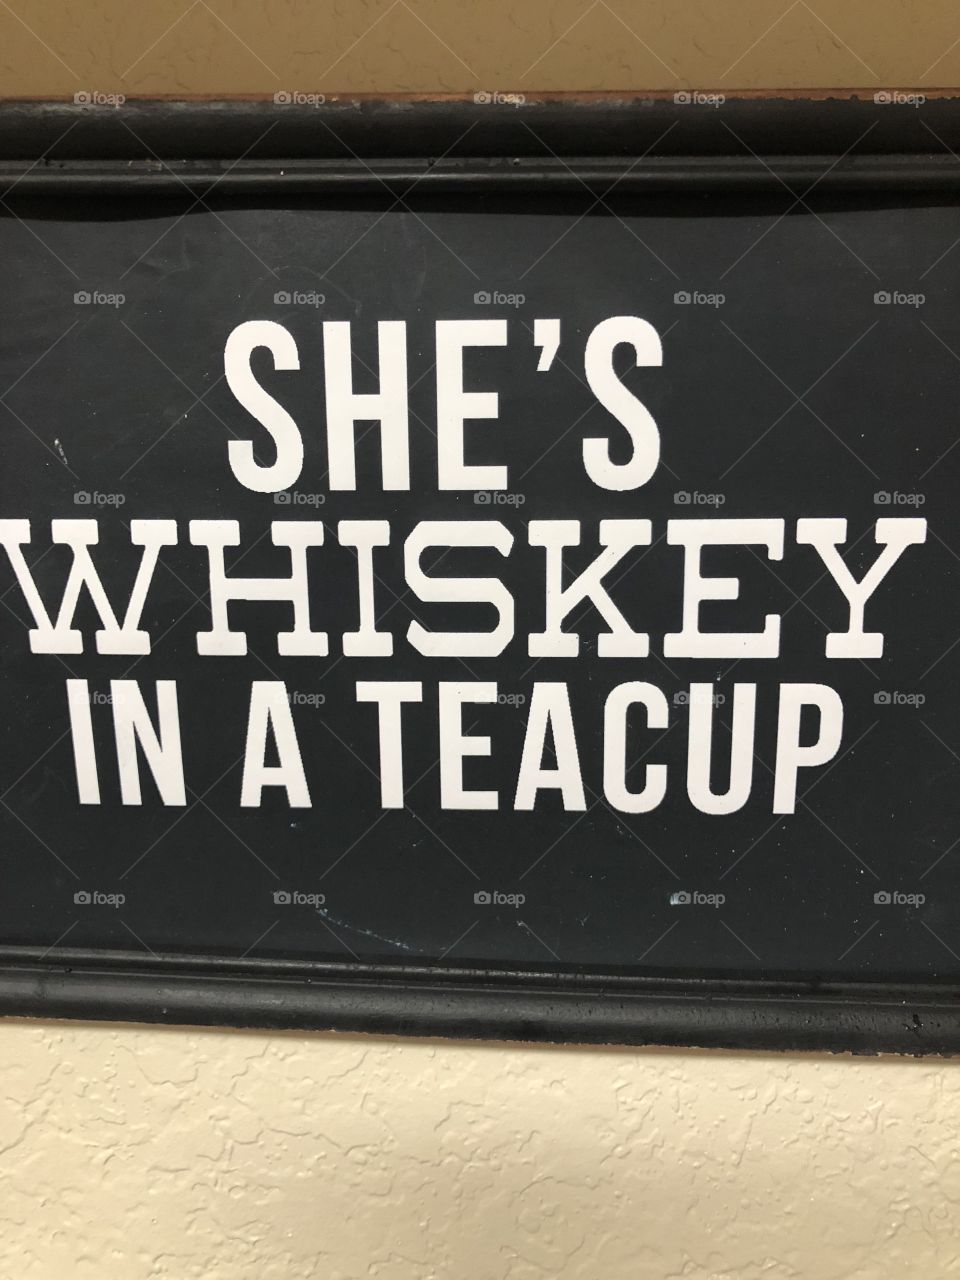 Whiskey in a teacup